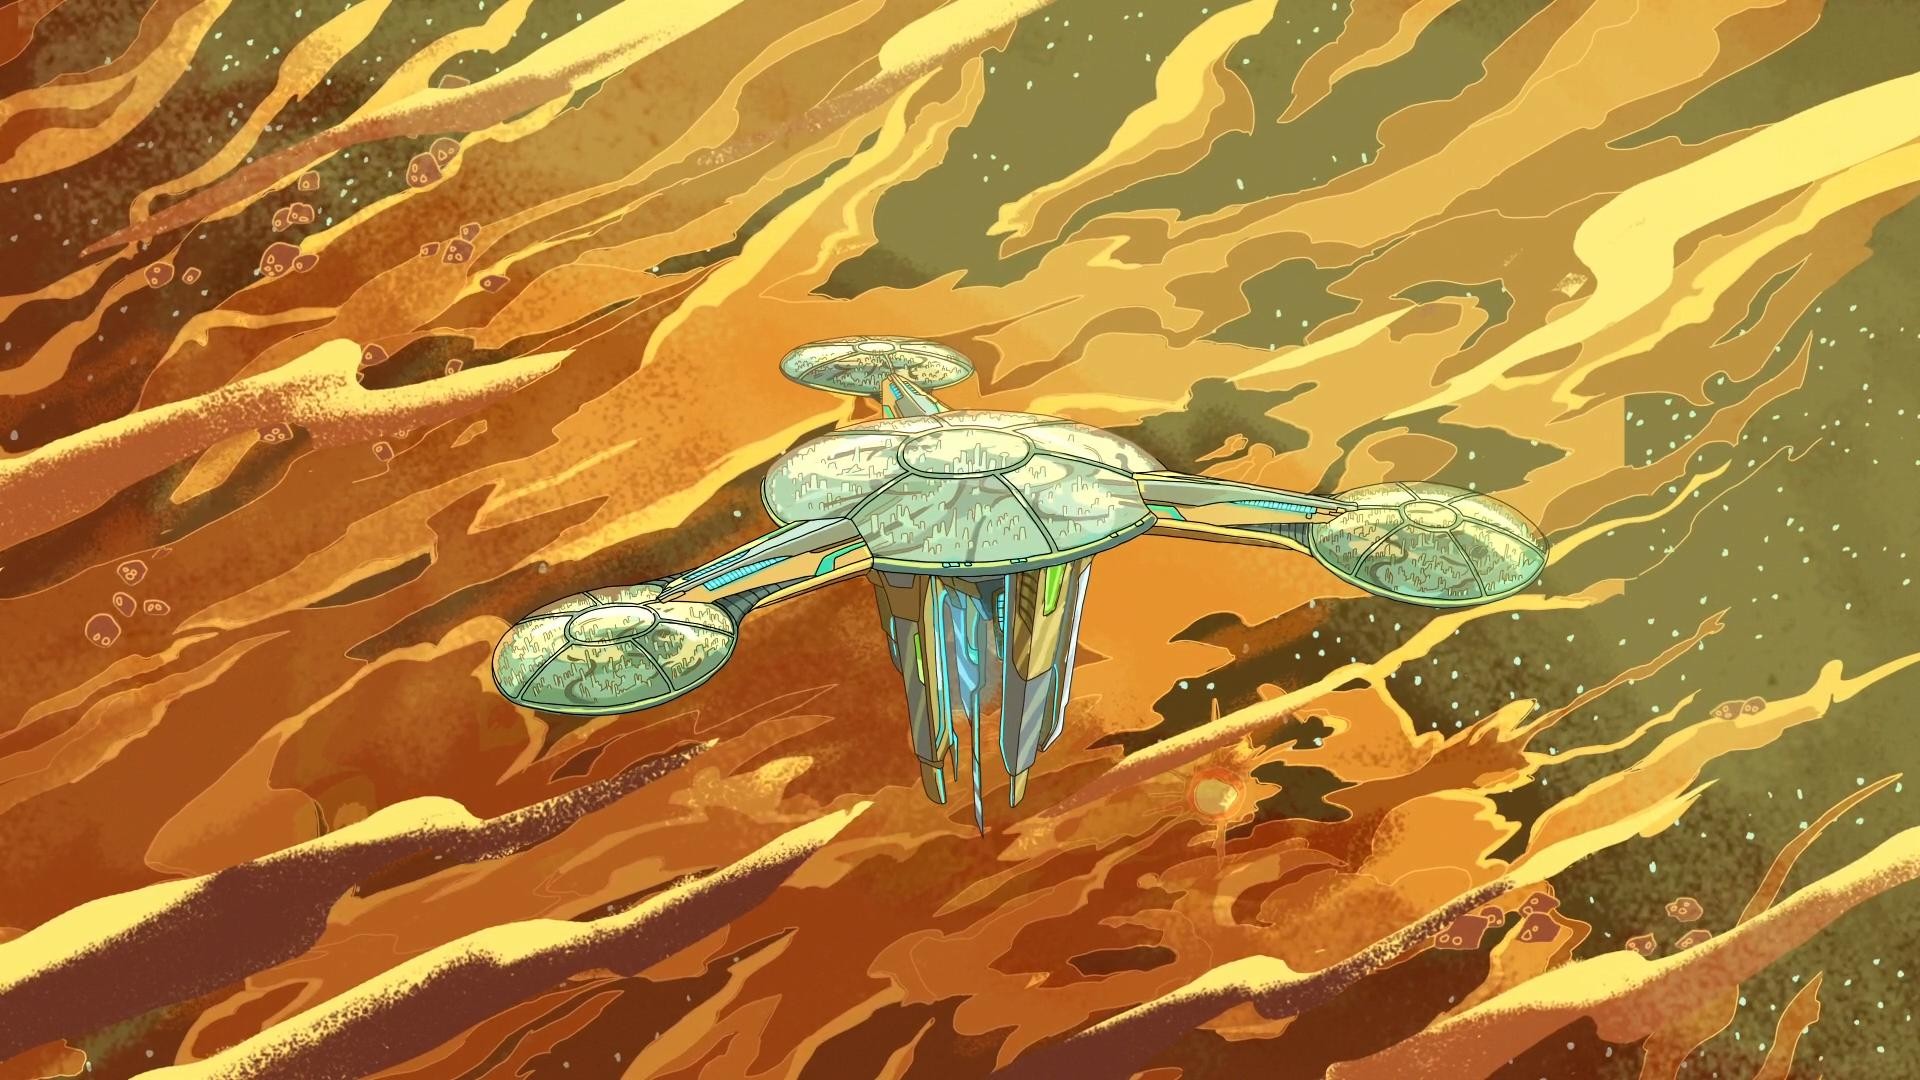 General 1920x1080 Rick and Morty cartoon space station TV series